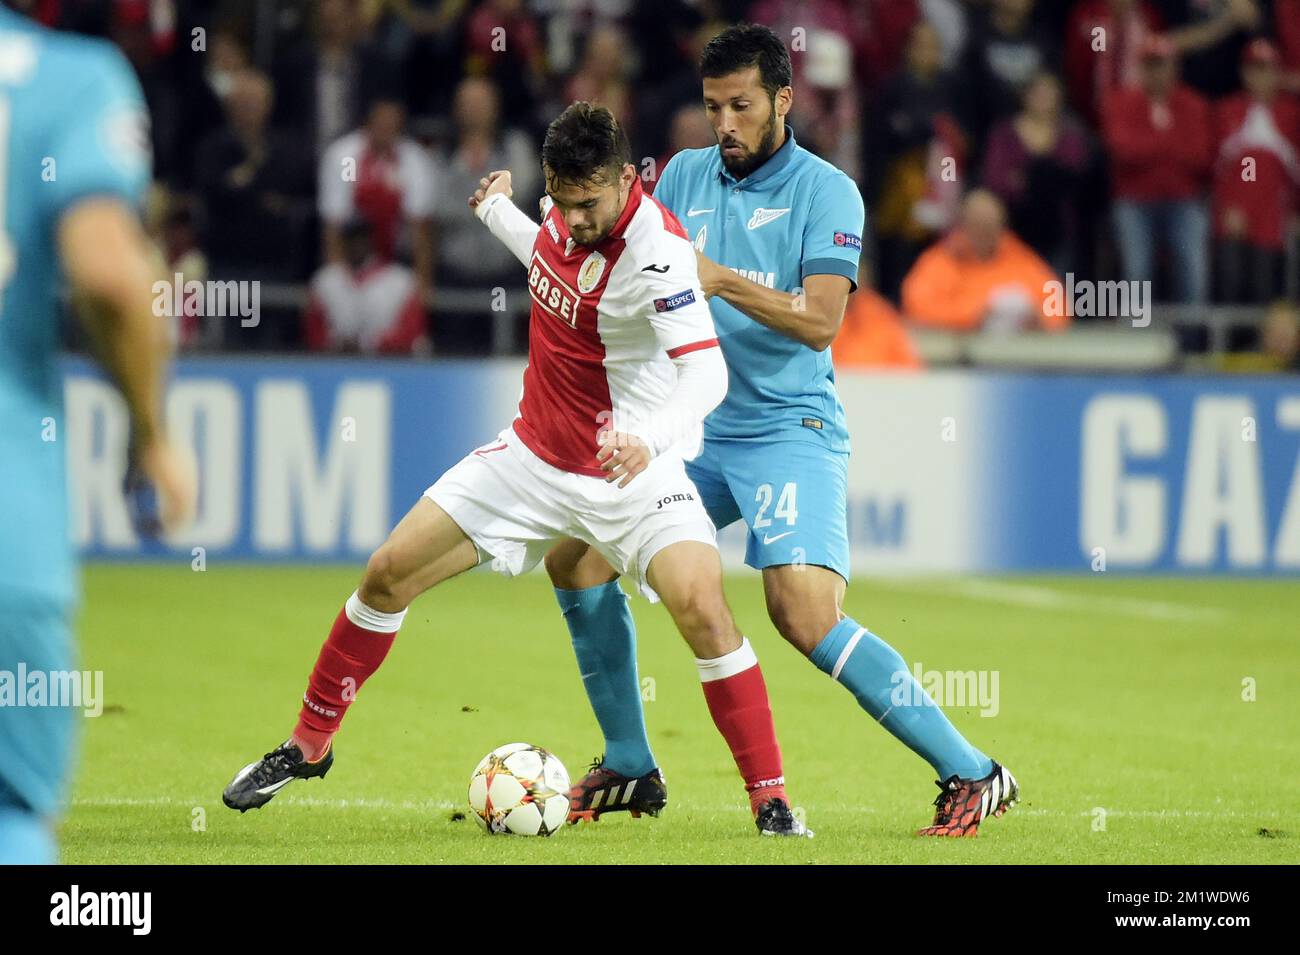 Standard's Tony Watt and Zenit's Ezequiel Garay fight for the ball during the first leg match between Belgian first division soccer team Standard de Liege and Russian team FC Zenit Saint Petersburg in the playoffs for the UEFA Champions League competition, Wednesday 20 August 2014, in Liege. Stock Photo